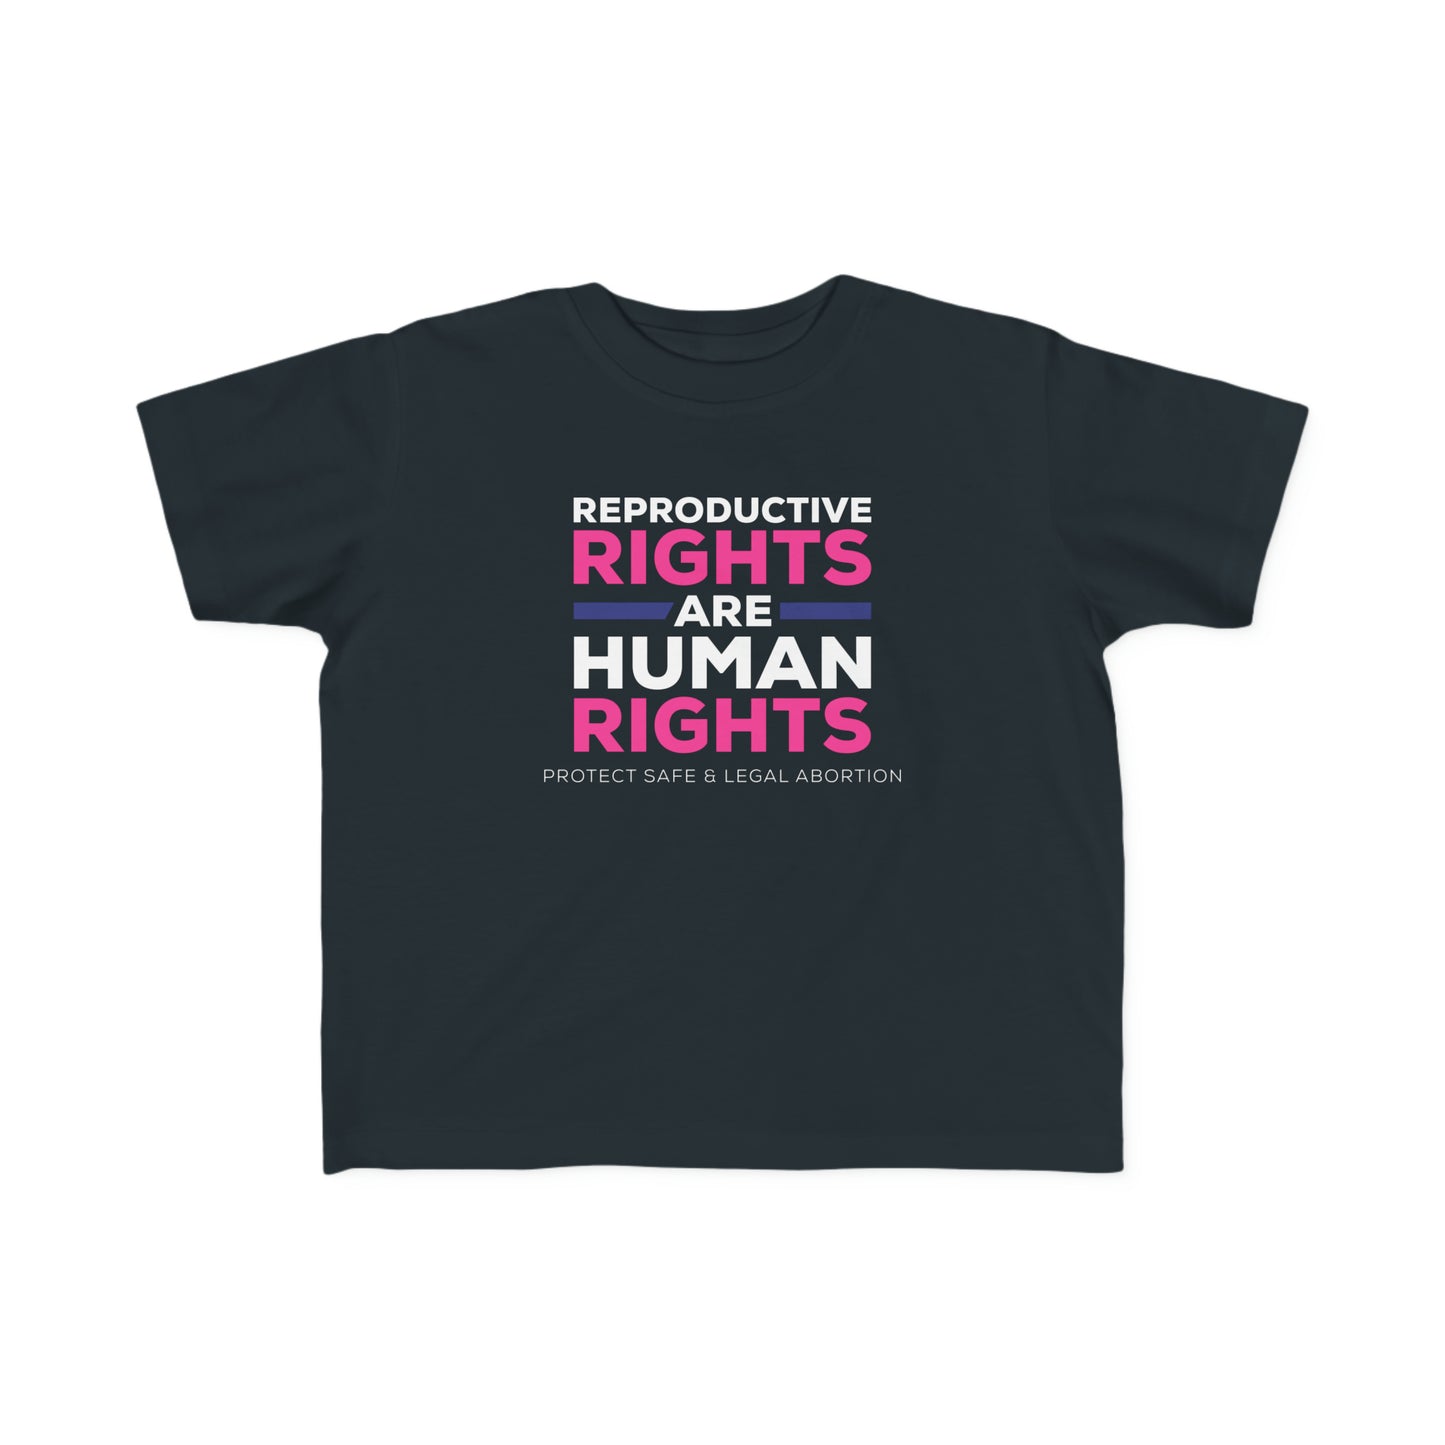 “Reproductive Rights” Toddler's Tee